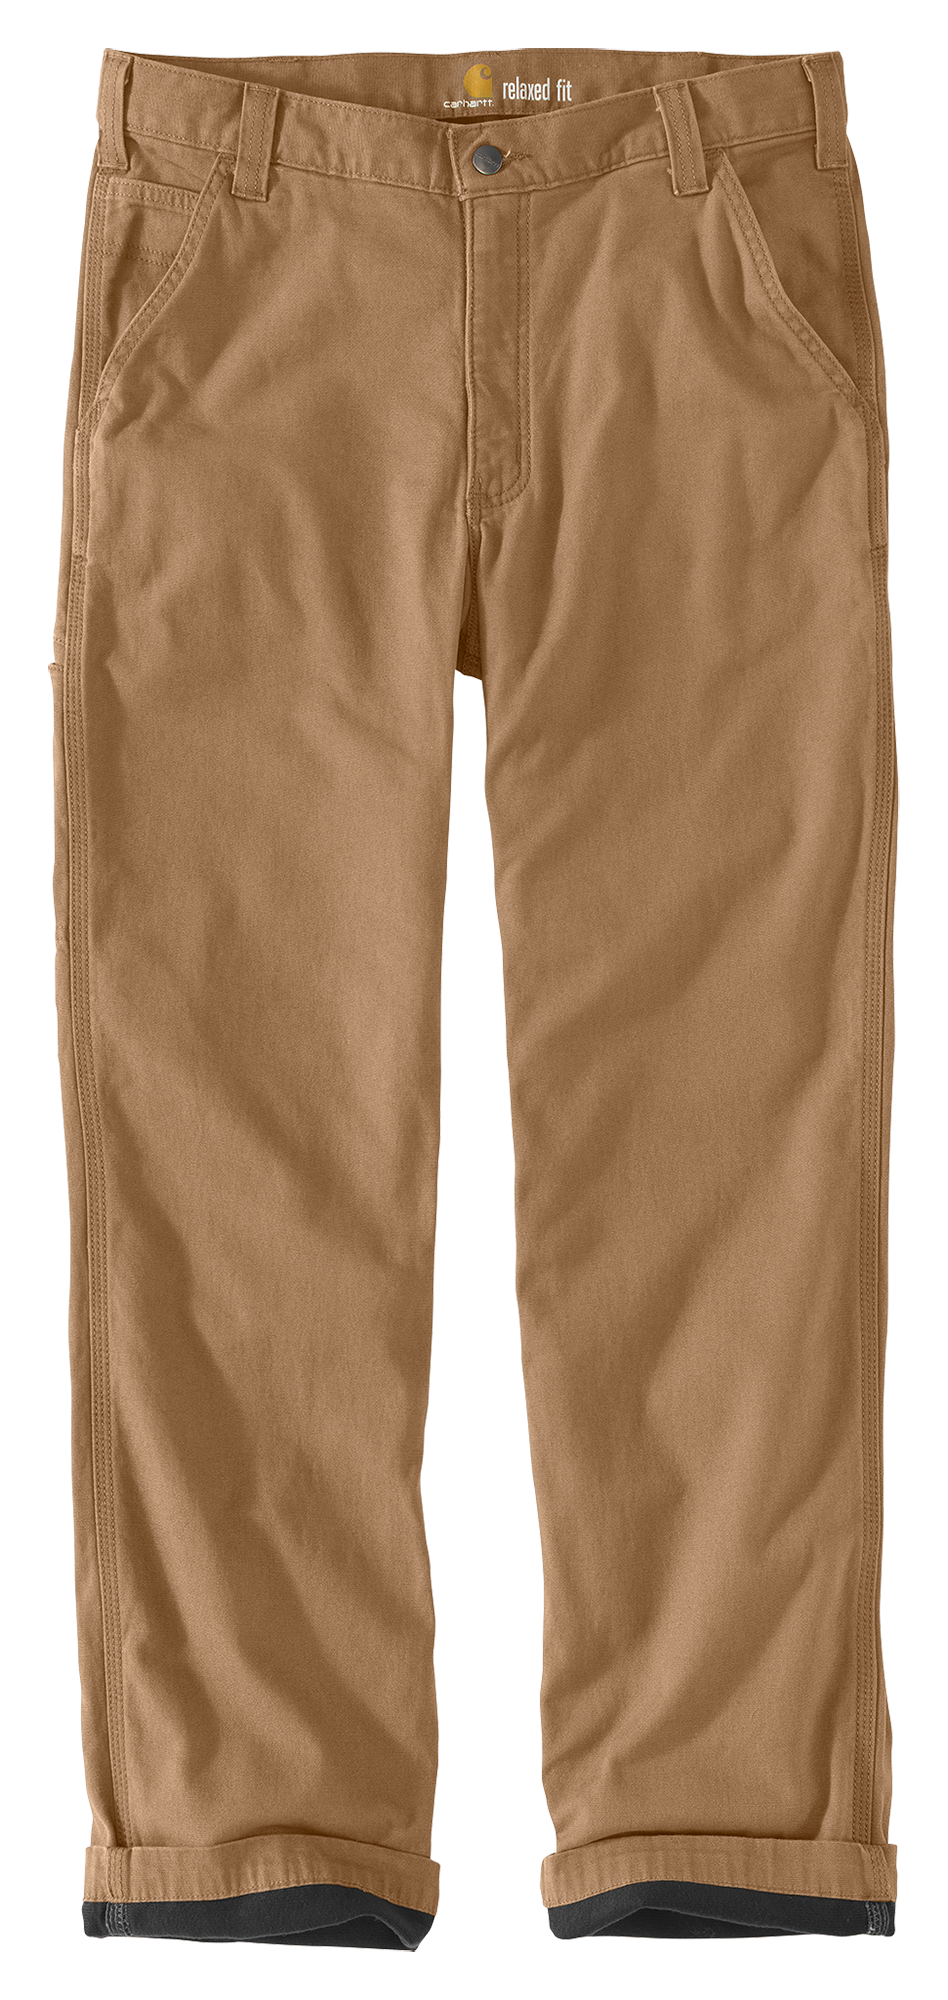 XPS Expedition Weight 3.0 Thermal Pants with X-Odor for Men